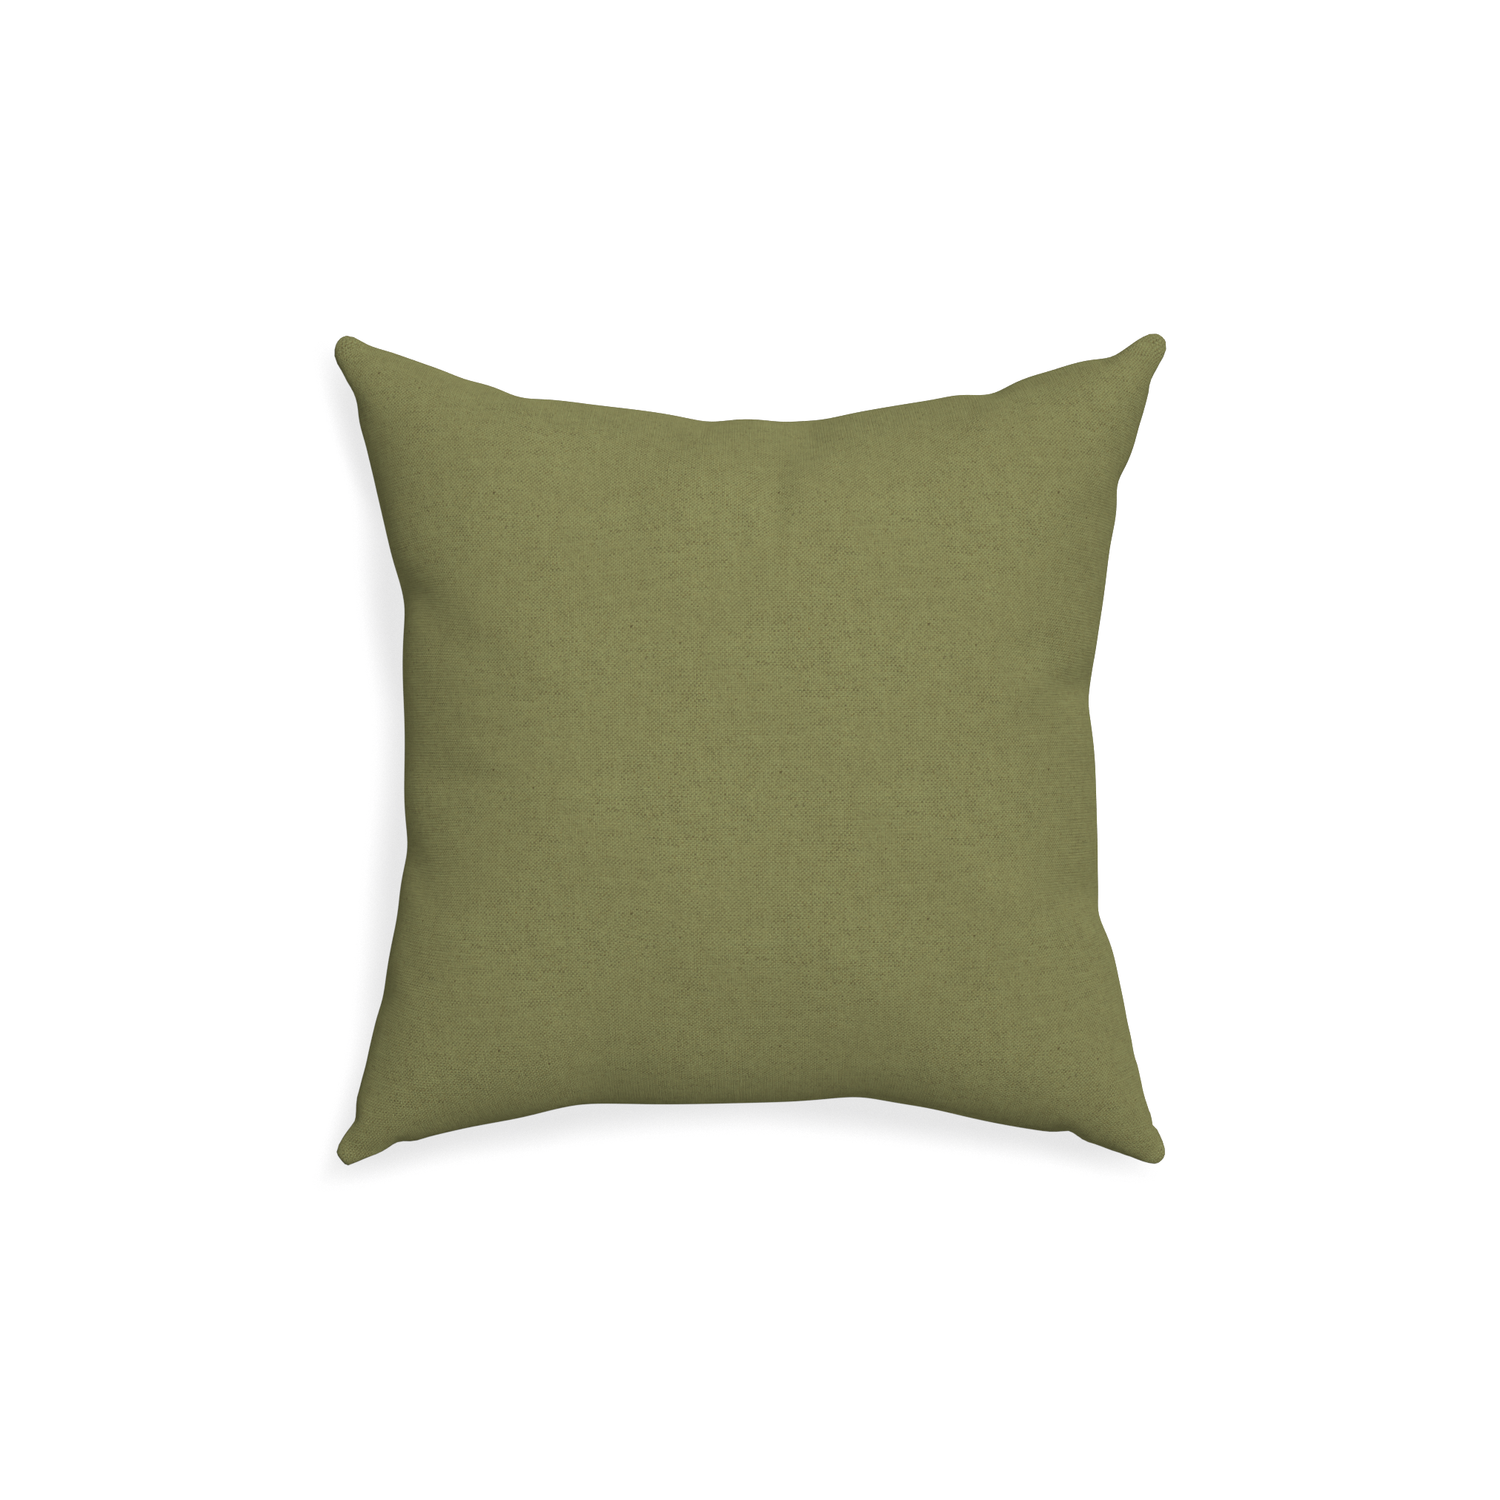 18-square moss custom moss greenpillow with none on white background